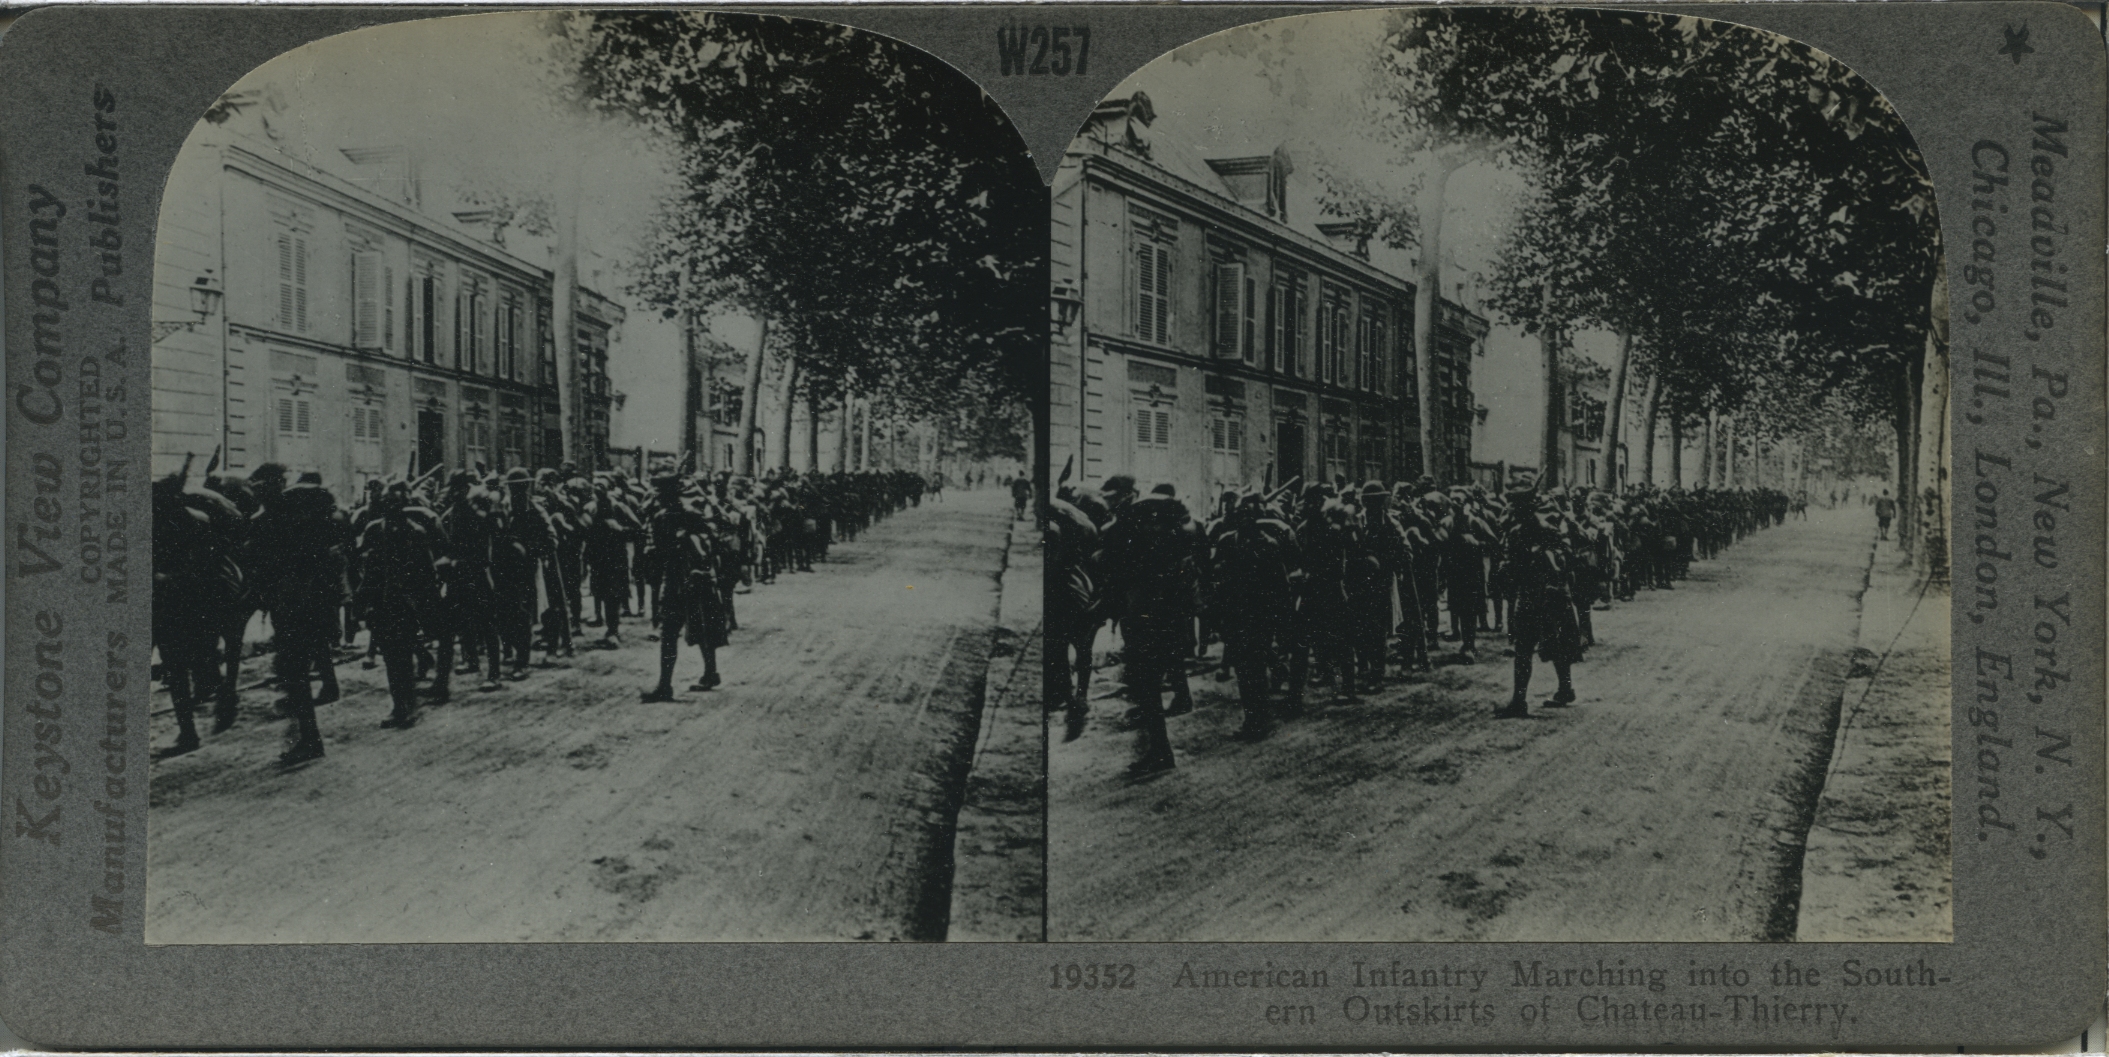 American Infantry Marching into the Southern Outskirts of Chateau-Thierry